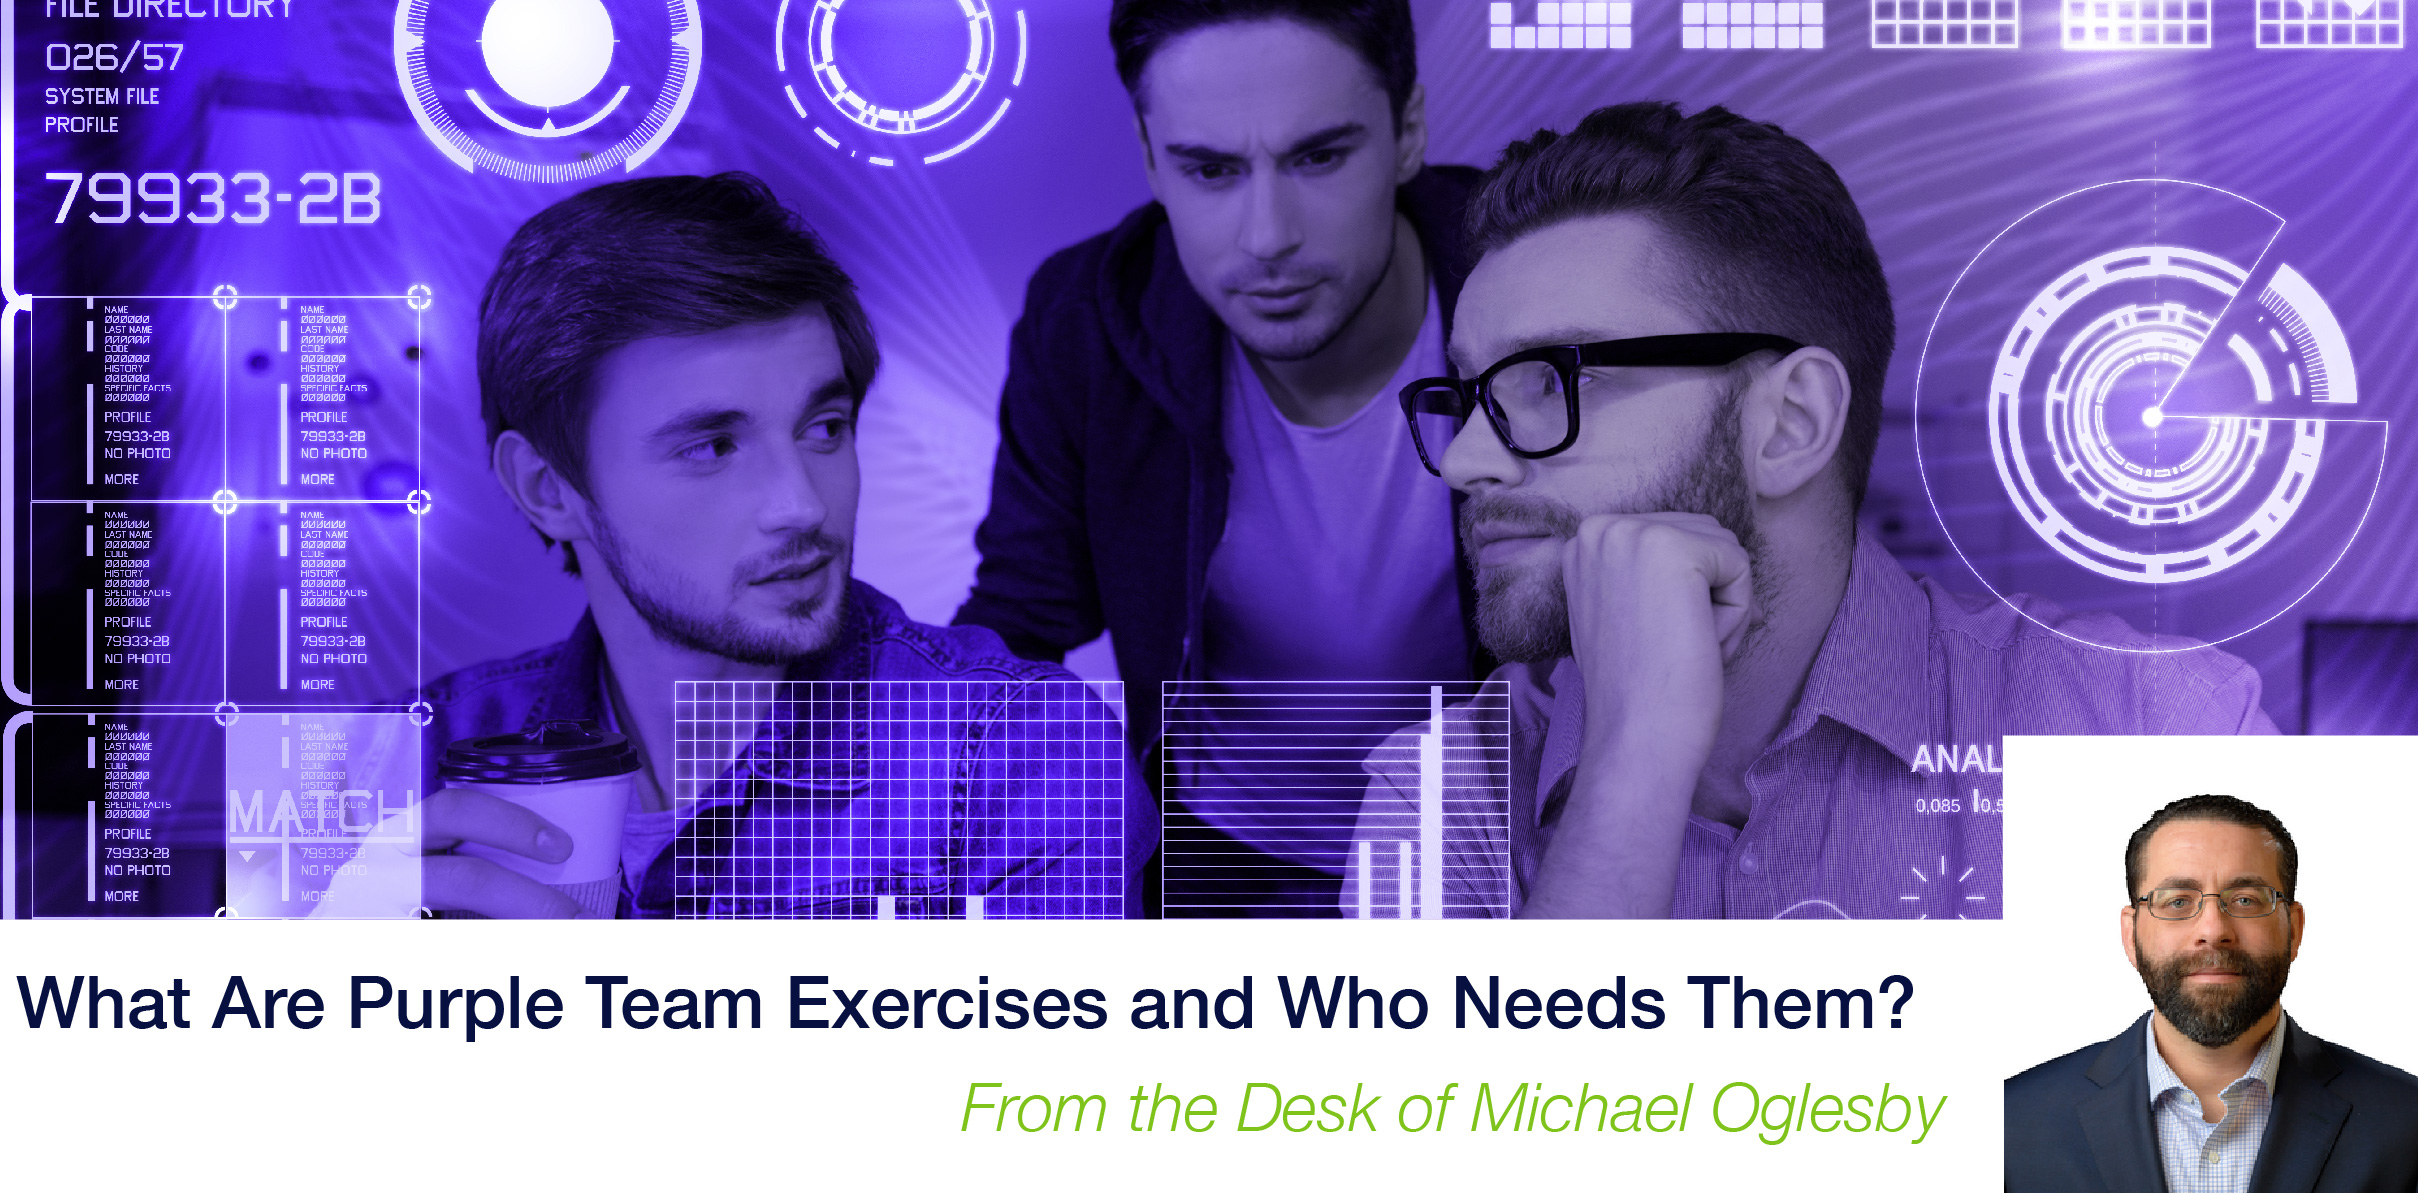 What Are Purple Team Exercises and Who Needs Them?